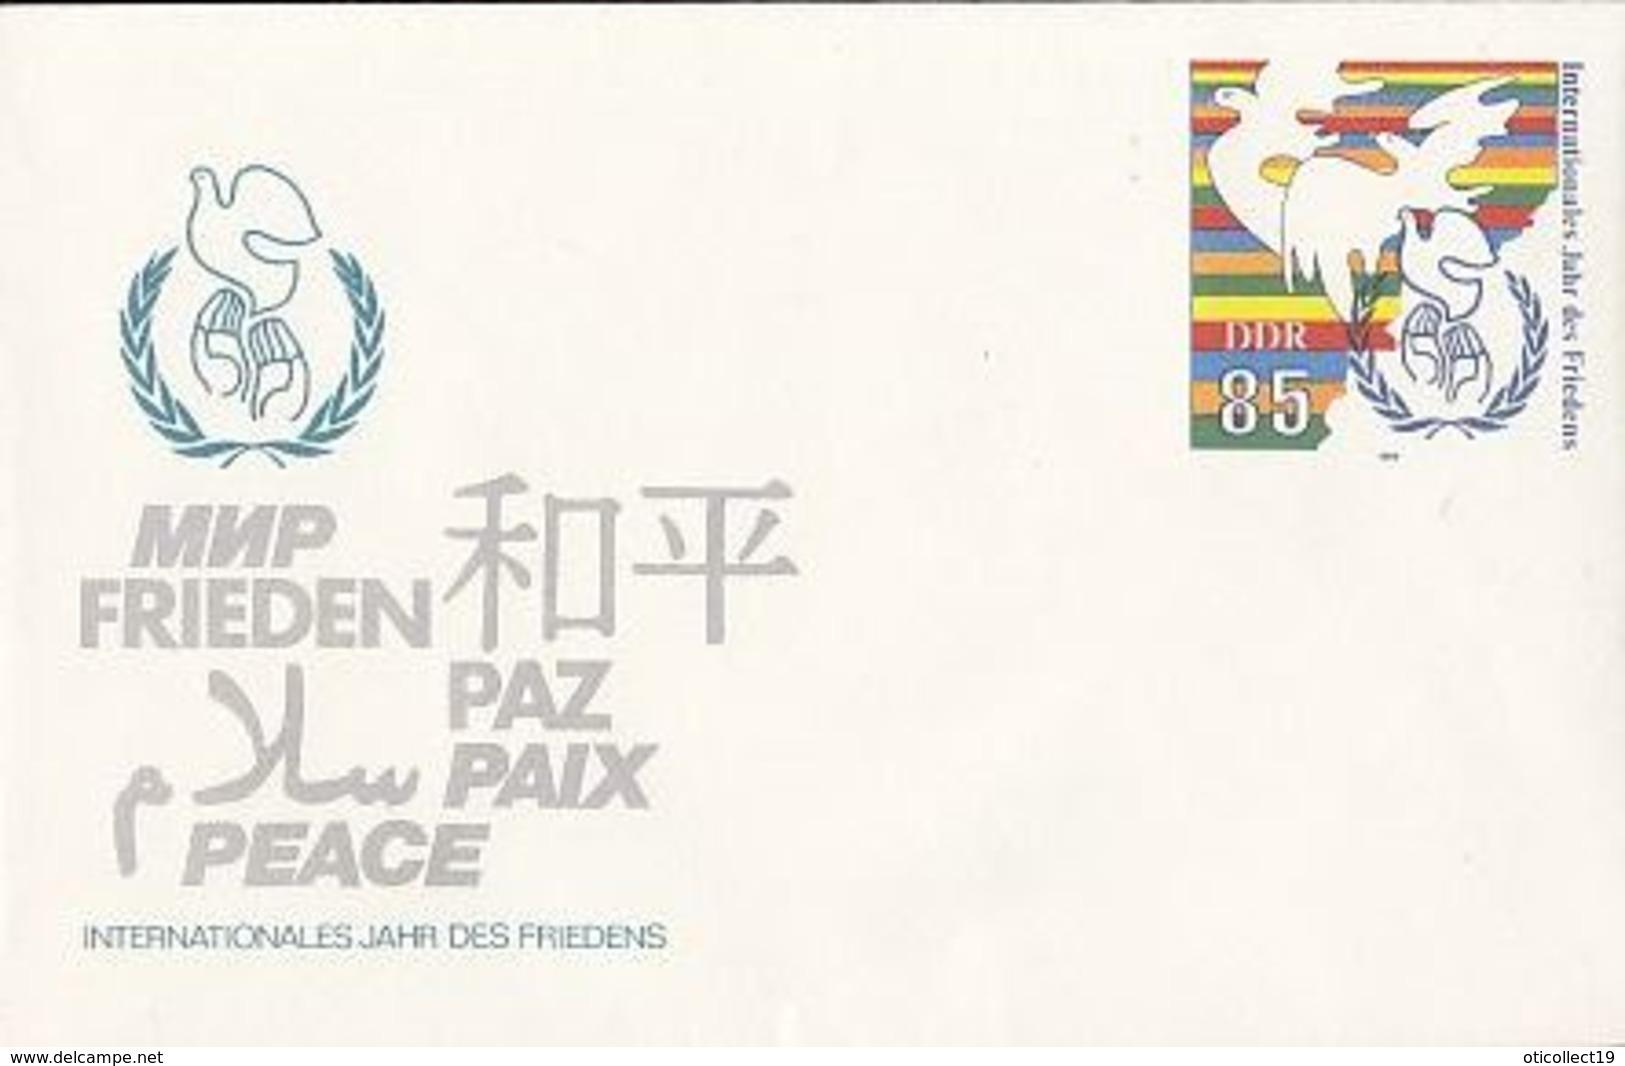 INTERNATIONAL YEAR OF FRIENDSHIP, PEACE, COVER STATIONERY, 1986, GERMANY-DDR - Buste - Nuovi